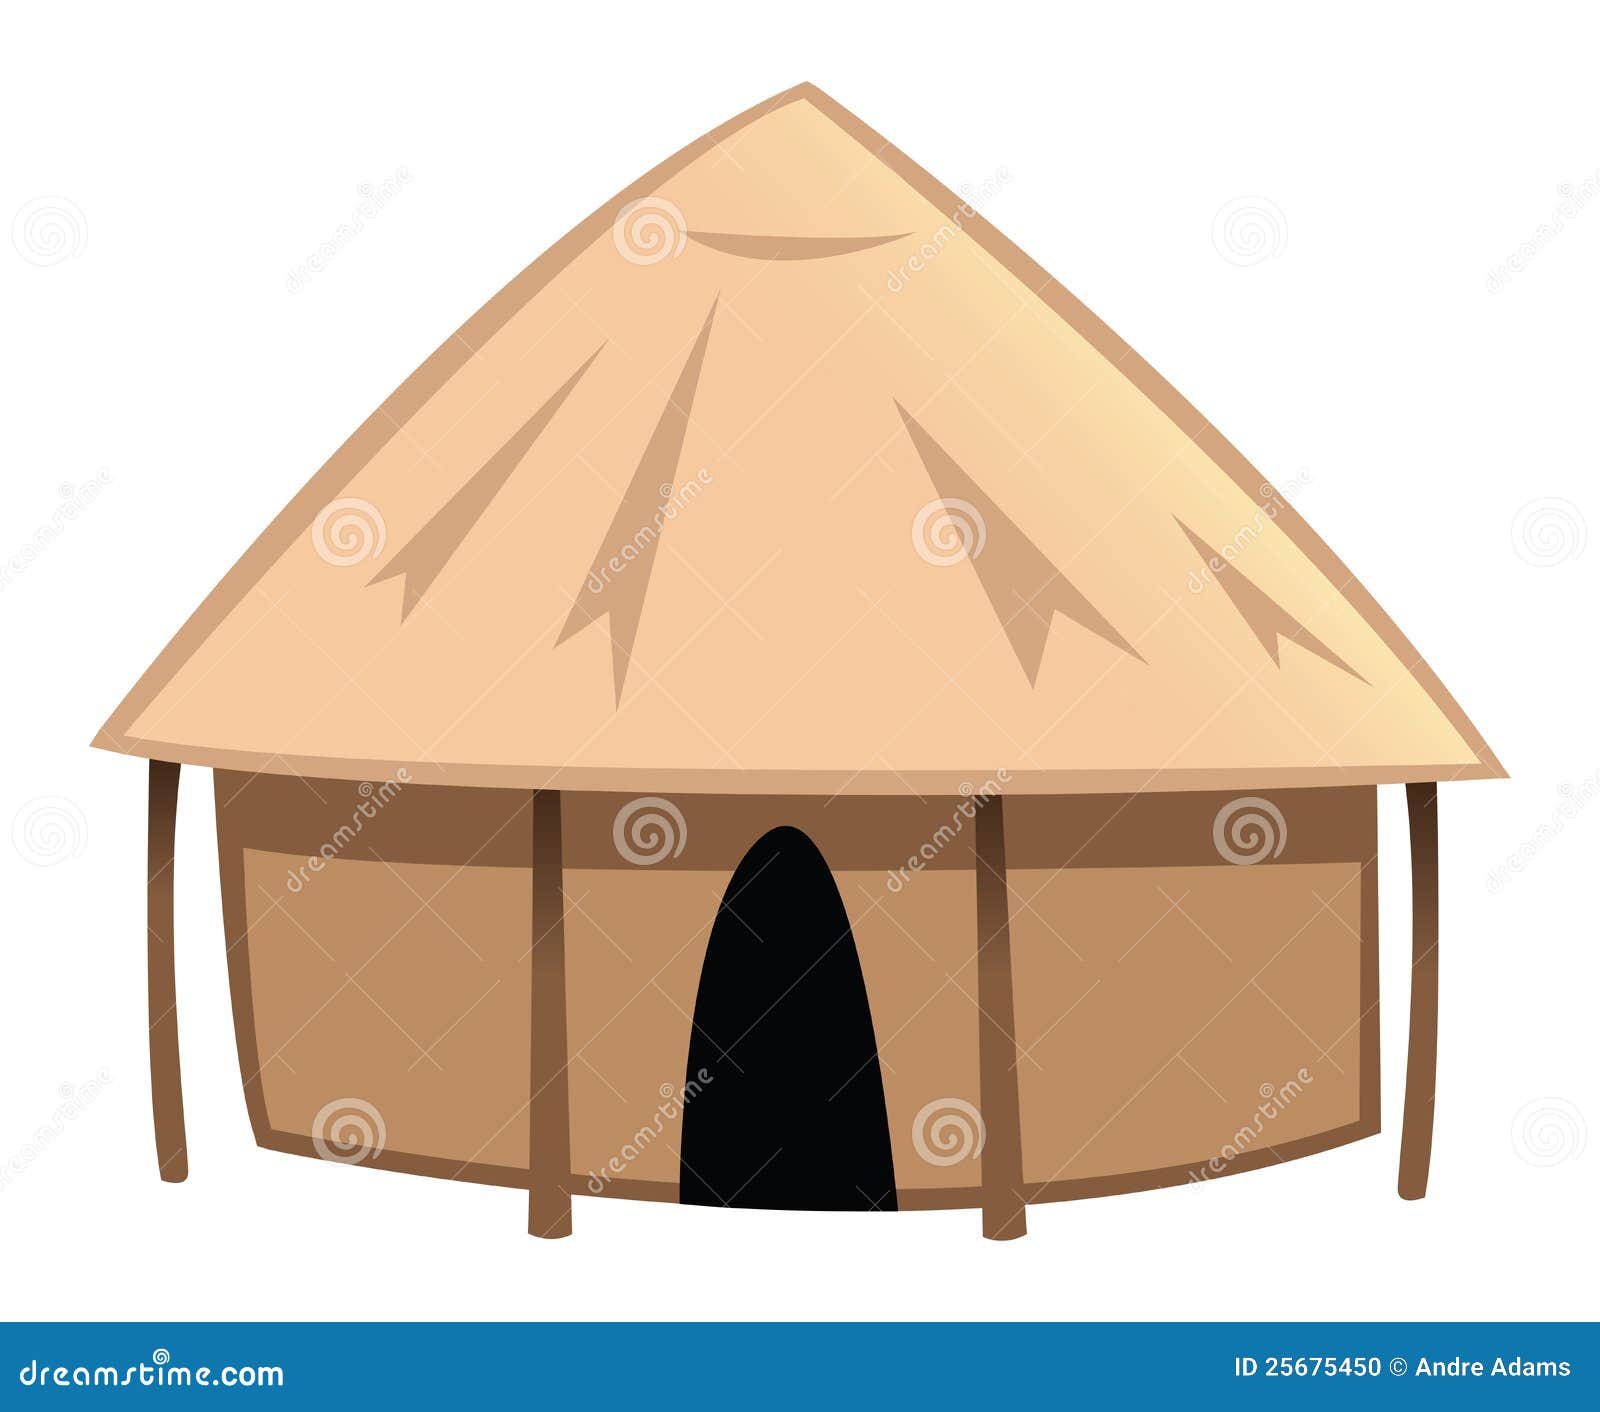 clipart images of hut - photo #38